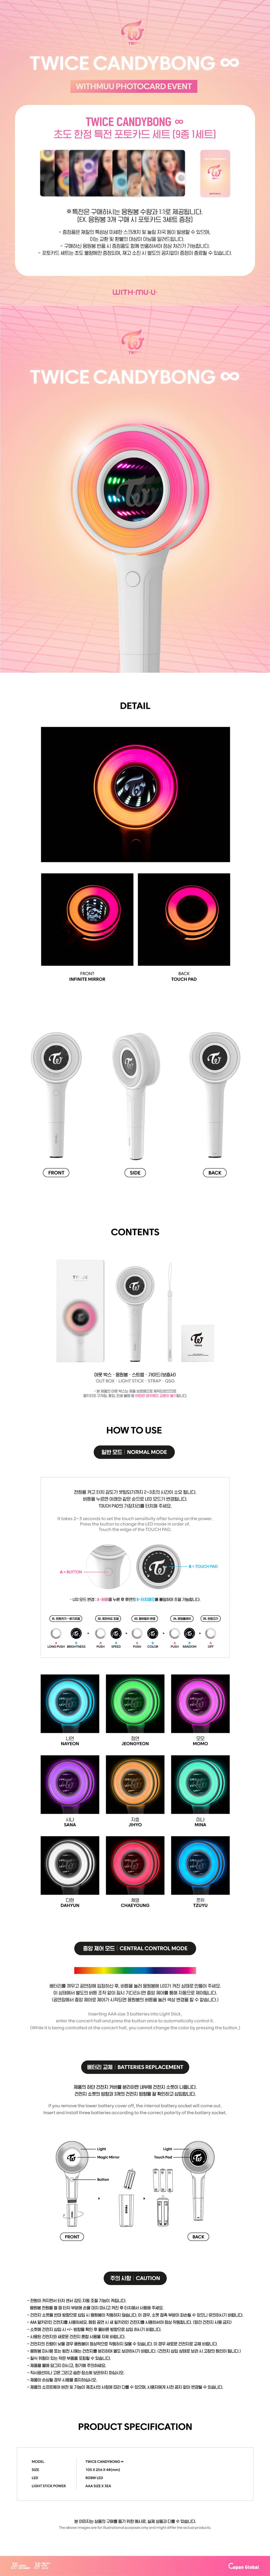 Twice - Candybong Infinity Official Lightstick Ver. 3 – Maycore